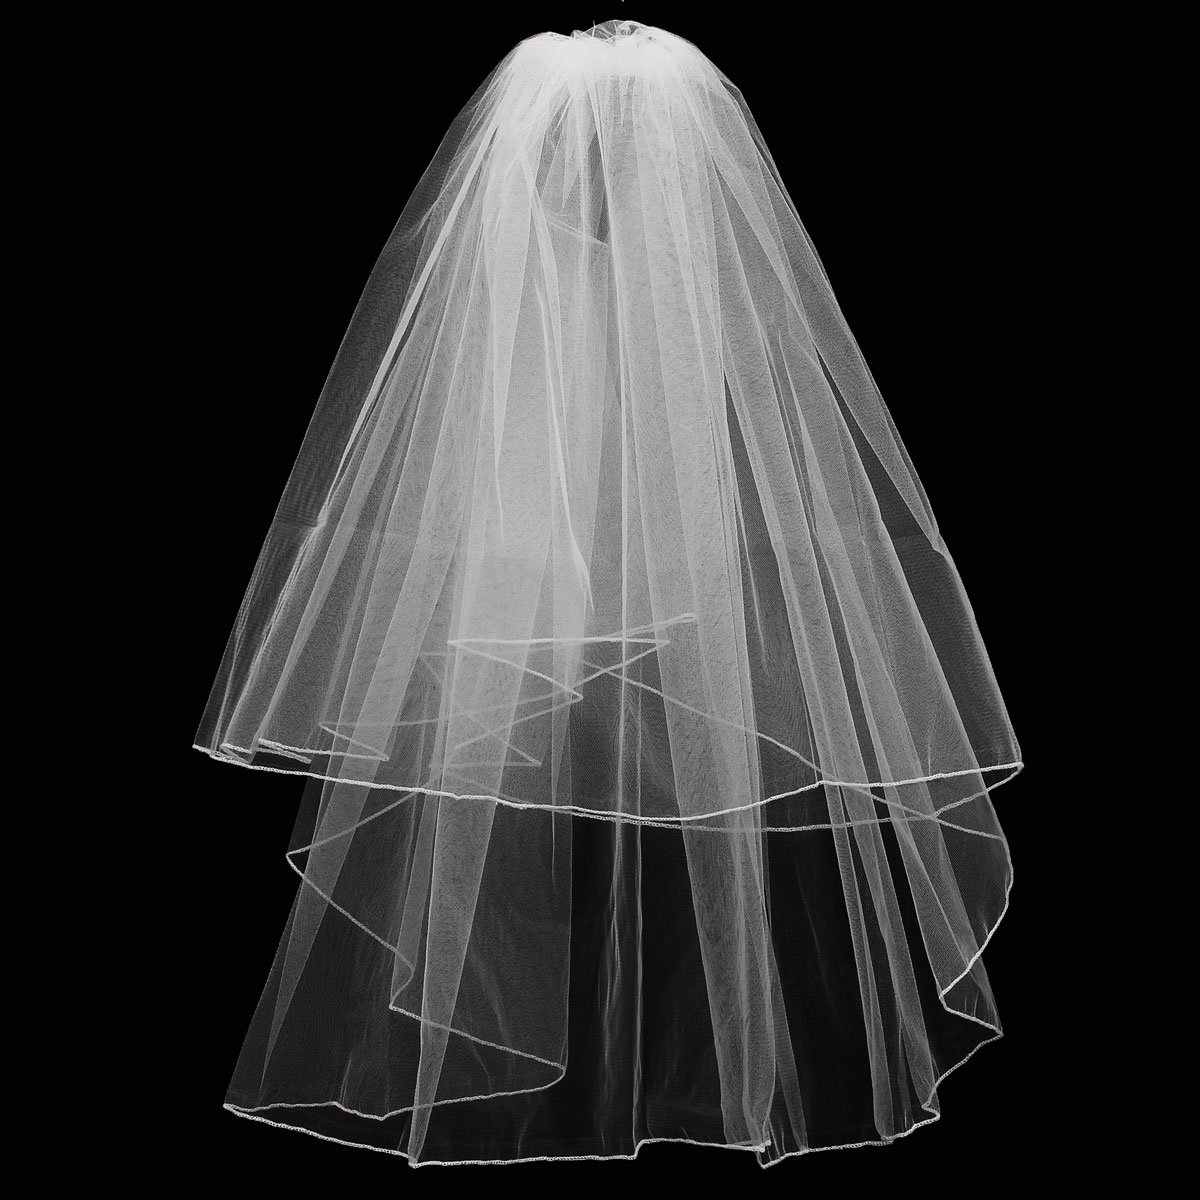 2-Layers-Bride-White-Ivory-Wedding-Bridal-Elbow-Hemmed-Satin-Edge-Veil-With-Comb-1025633